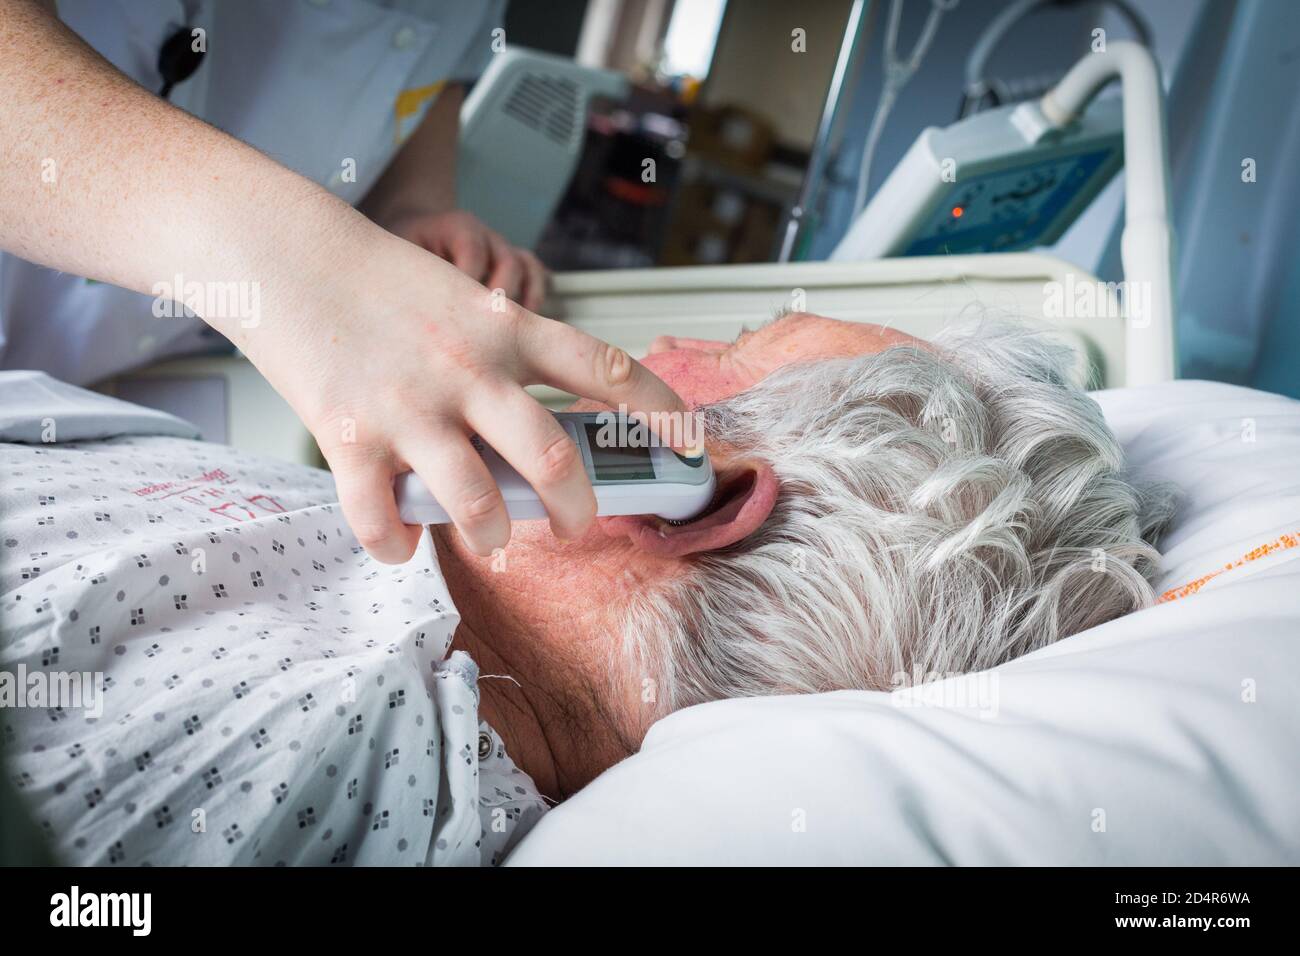 Nurse taking temperature of a patient, France. Stock Photo